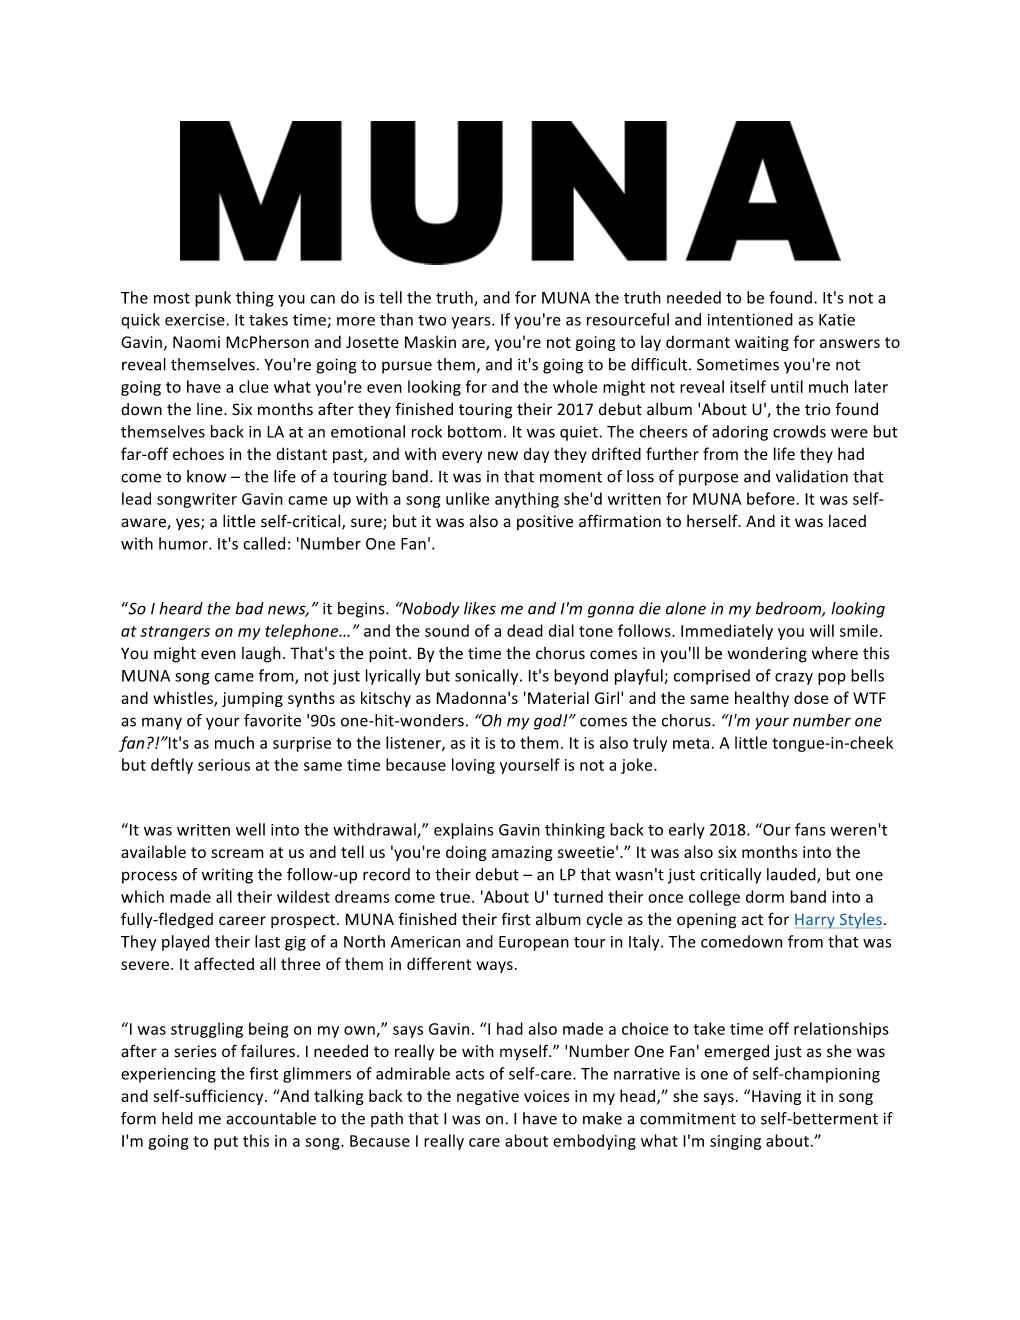 The Most Punk Thing You Can Do Is Tell the Truth, and for MUNA the Truth Needed to Be Found